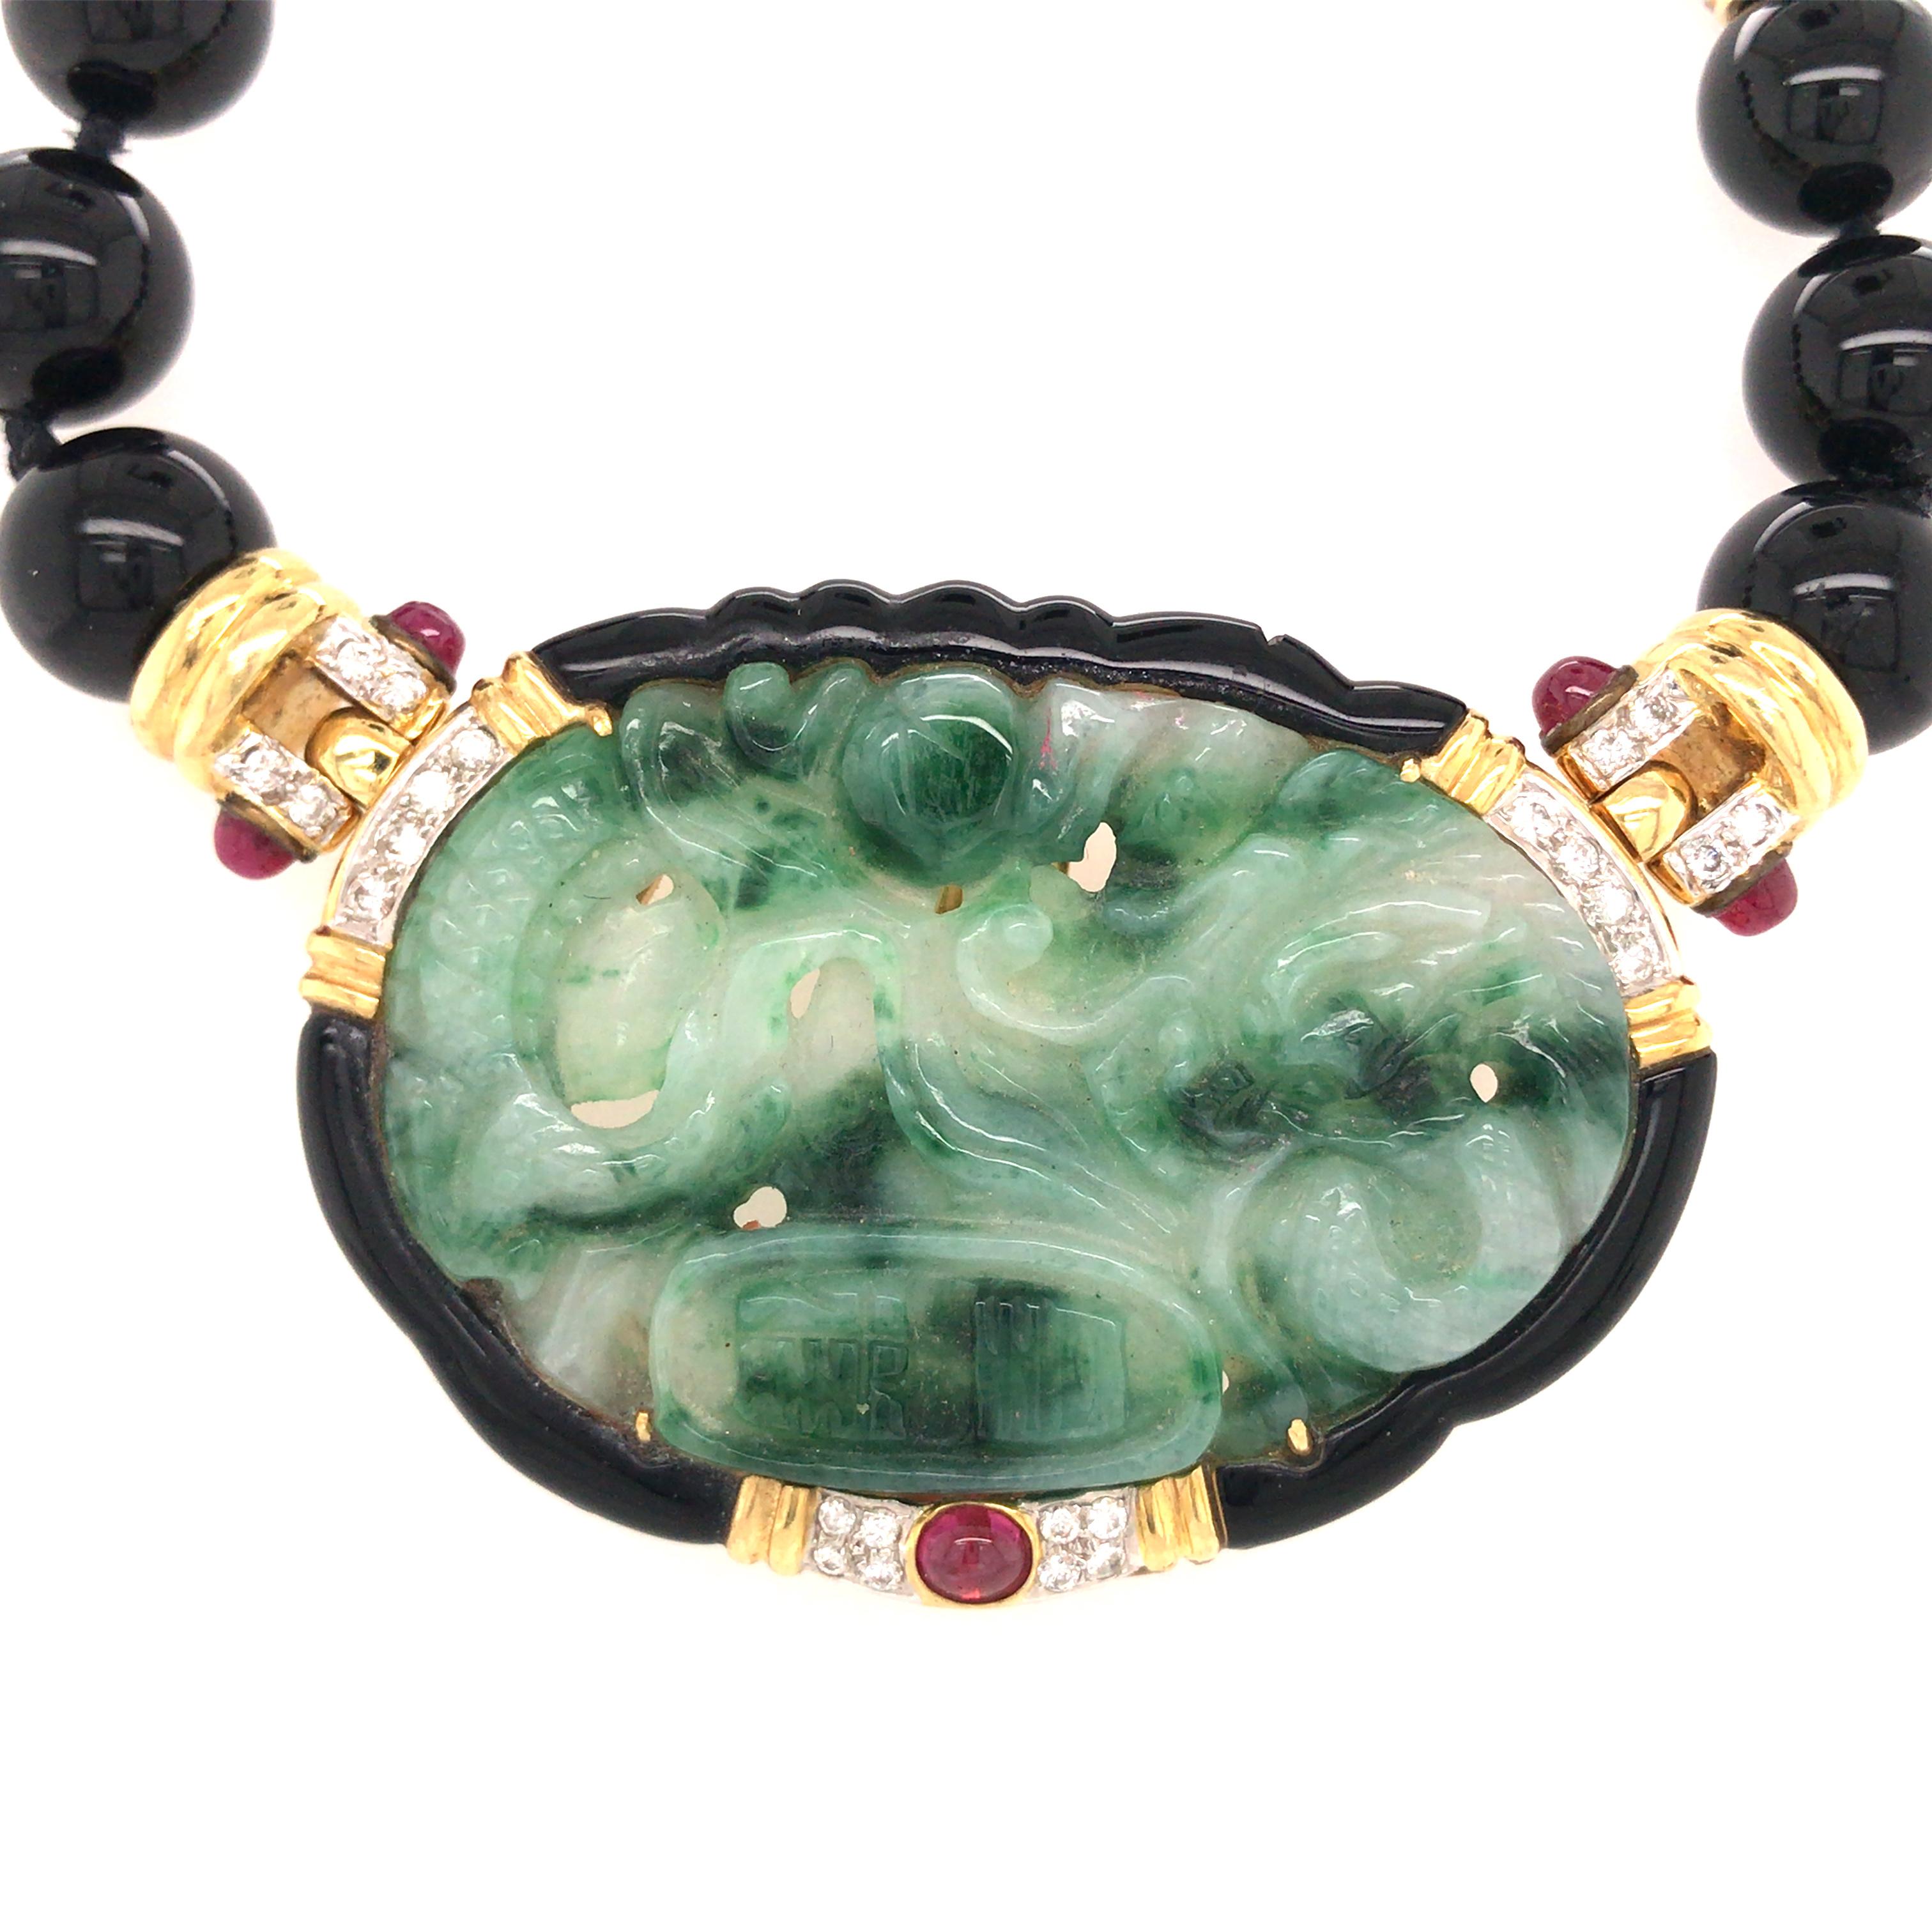 Jade, Ruby, Onyx and Diamond Pin/Enhancer/Necklace in 18K Yellow Gold.  The center oval Jade piece can be removed and worn as a Pin or Enhancer on another Necklace.  The Pin measures 2 inch in length and 1 1/2 inch in width.  The Necklace measure 14